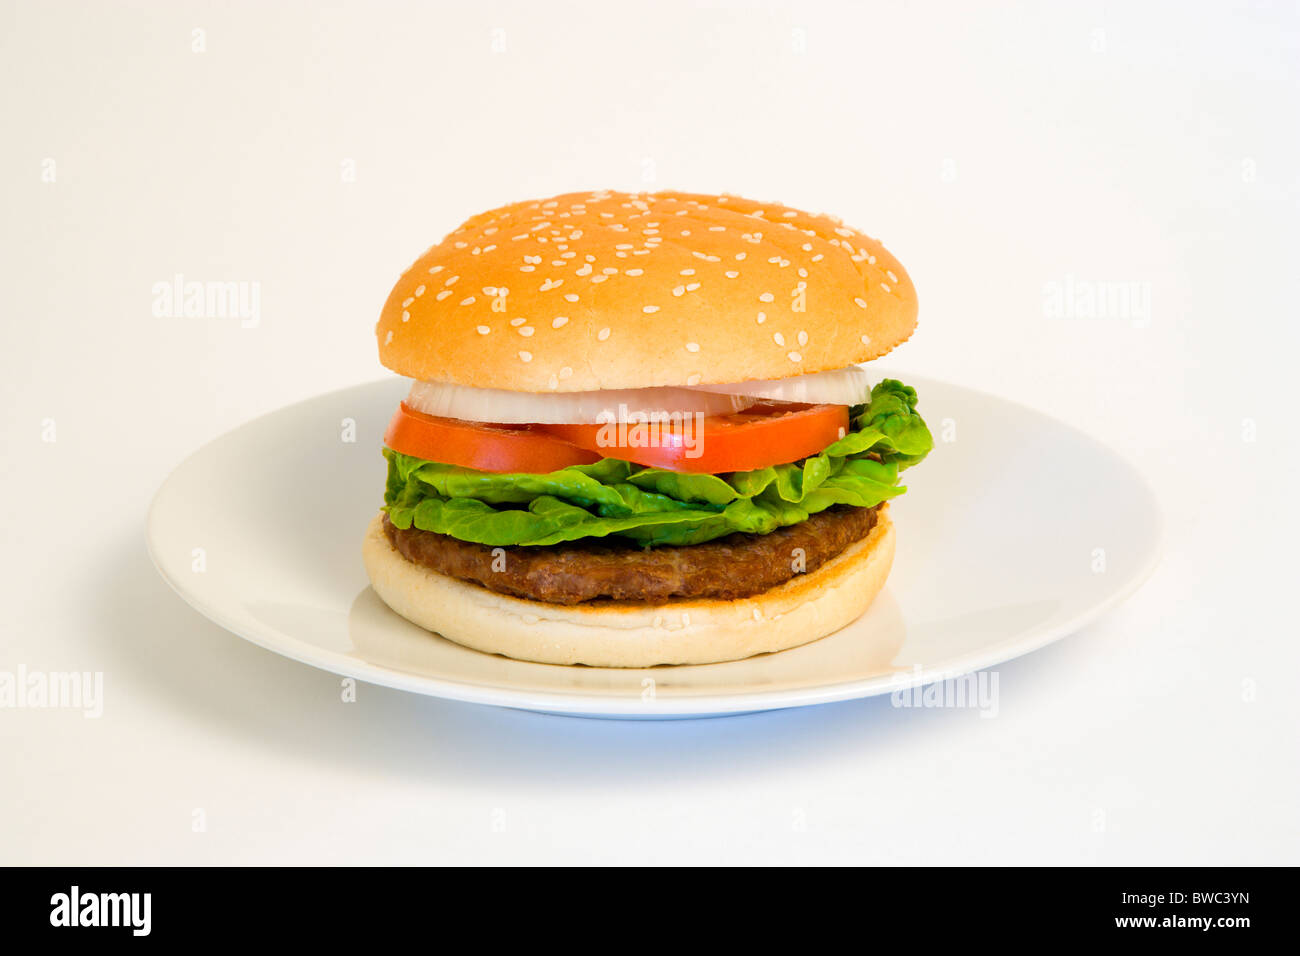 Food, Cooked, Hamburger, Single quarter pound burger with onion tomato and lettuce in a bun on a plate on a white background. Stock Photo